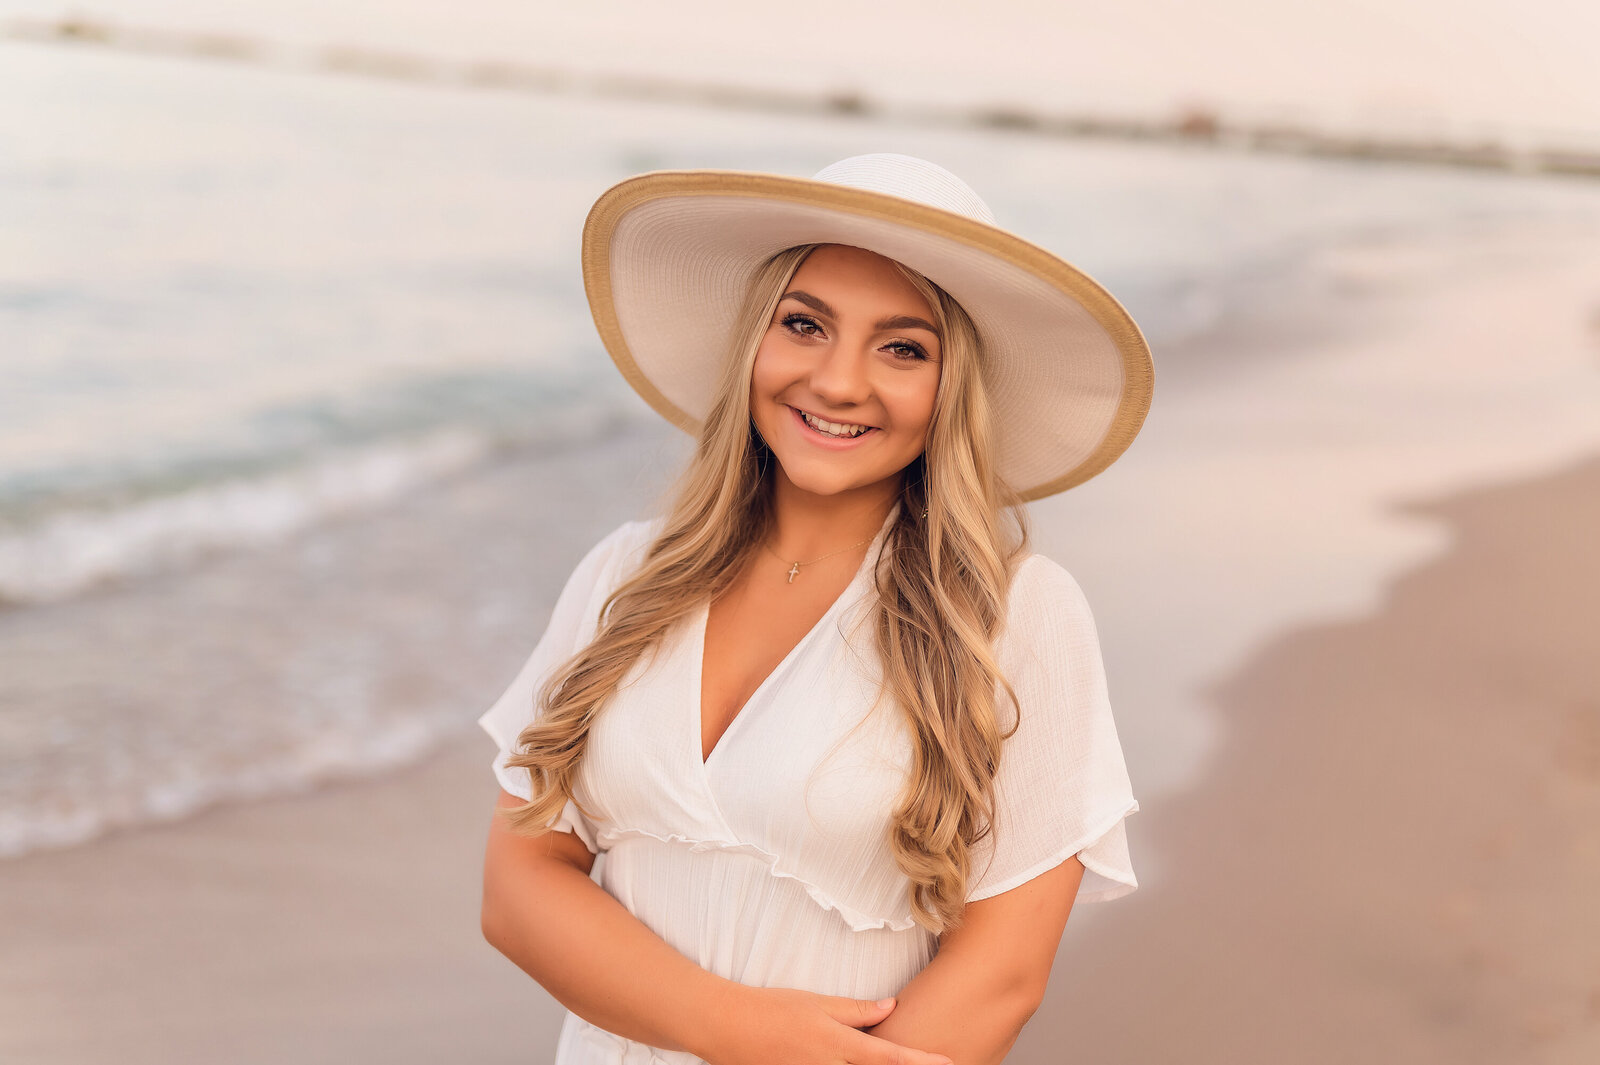 High school senior girl wearing a white dress and hat on the shores of Lake Michigan.